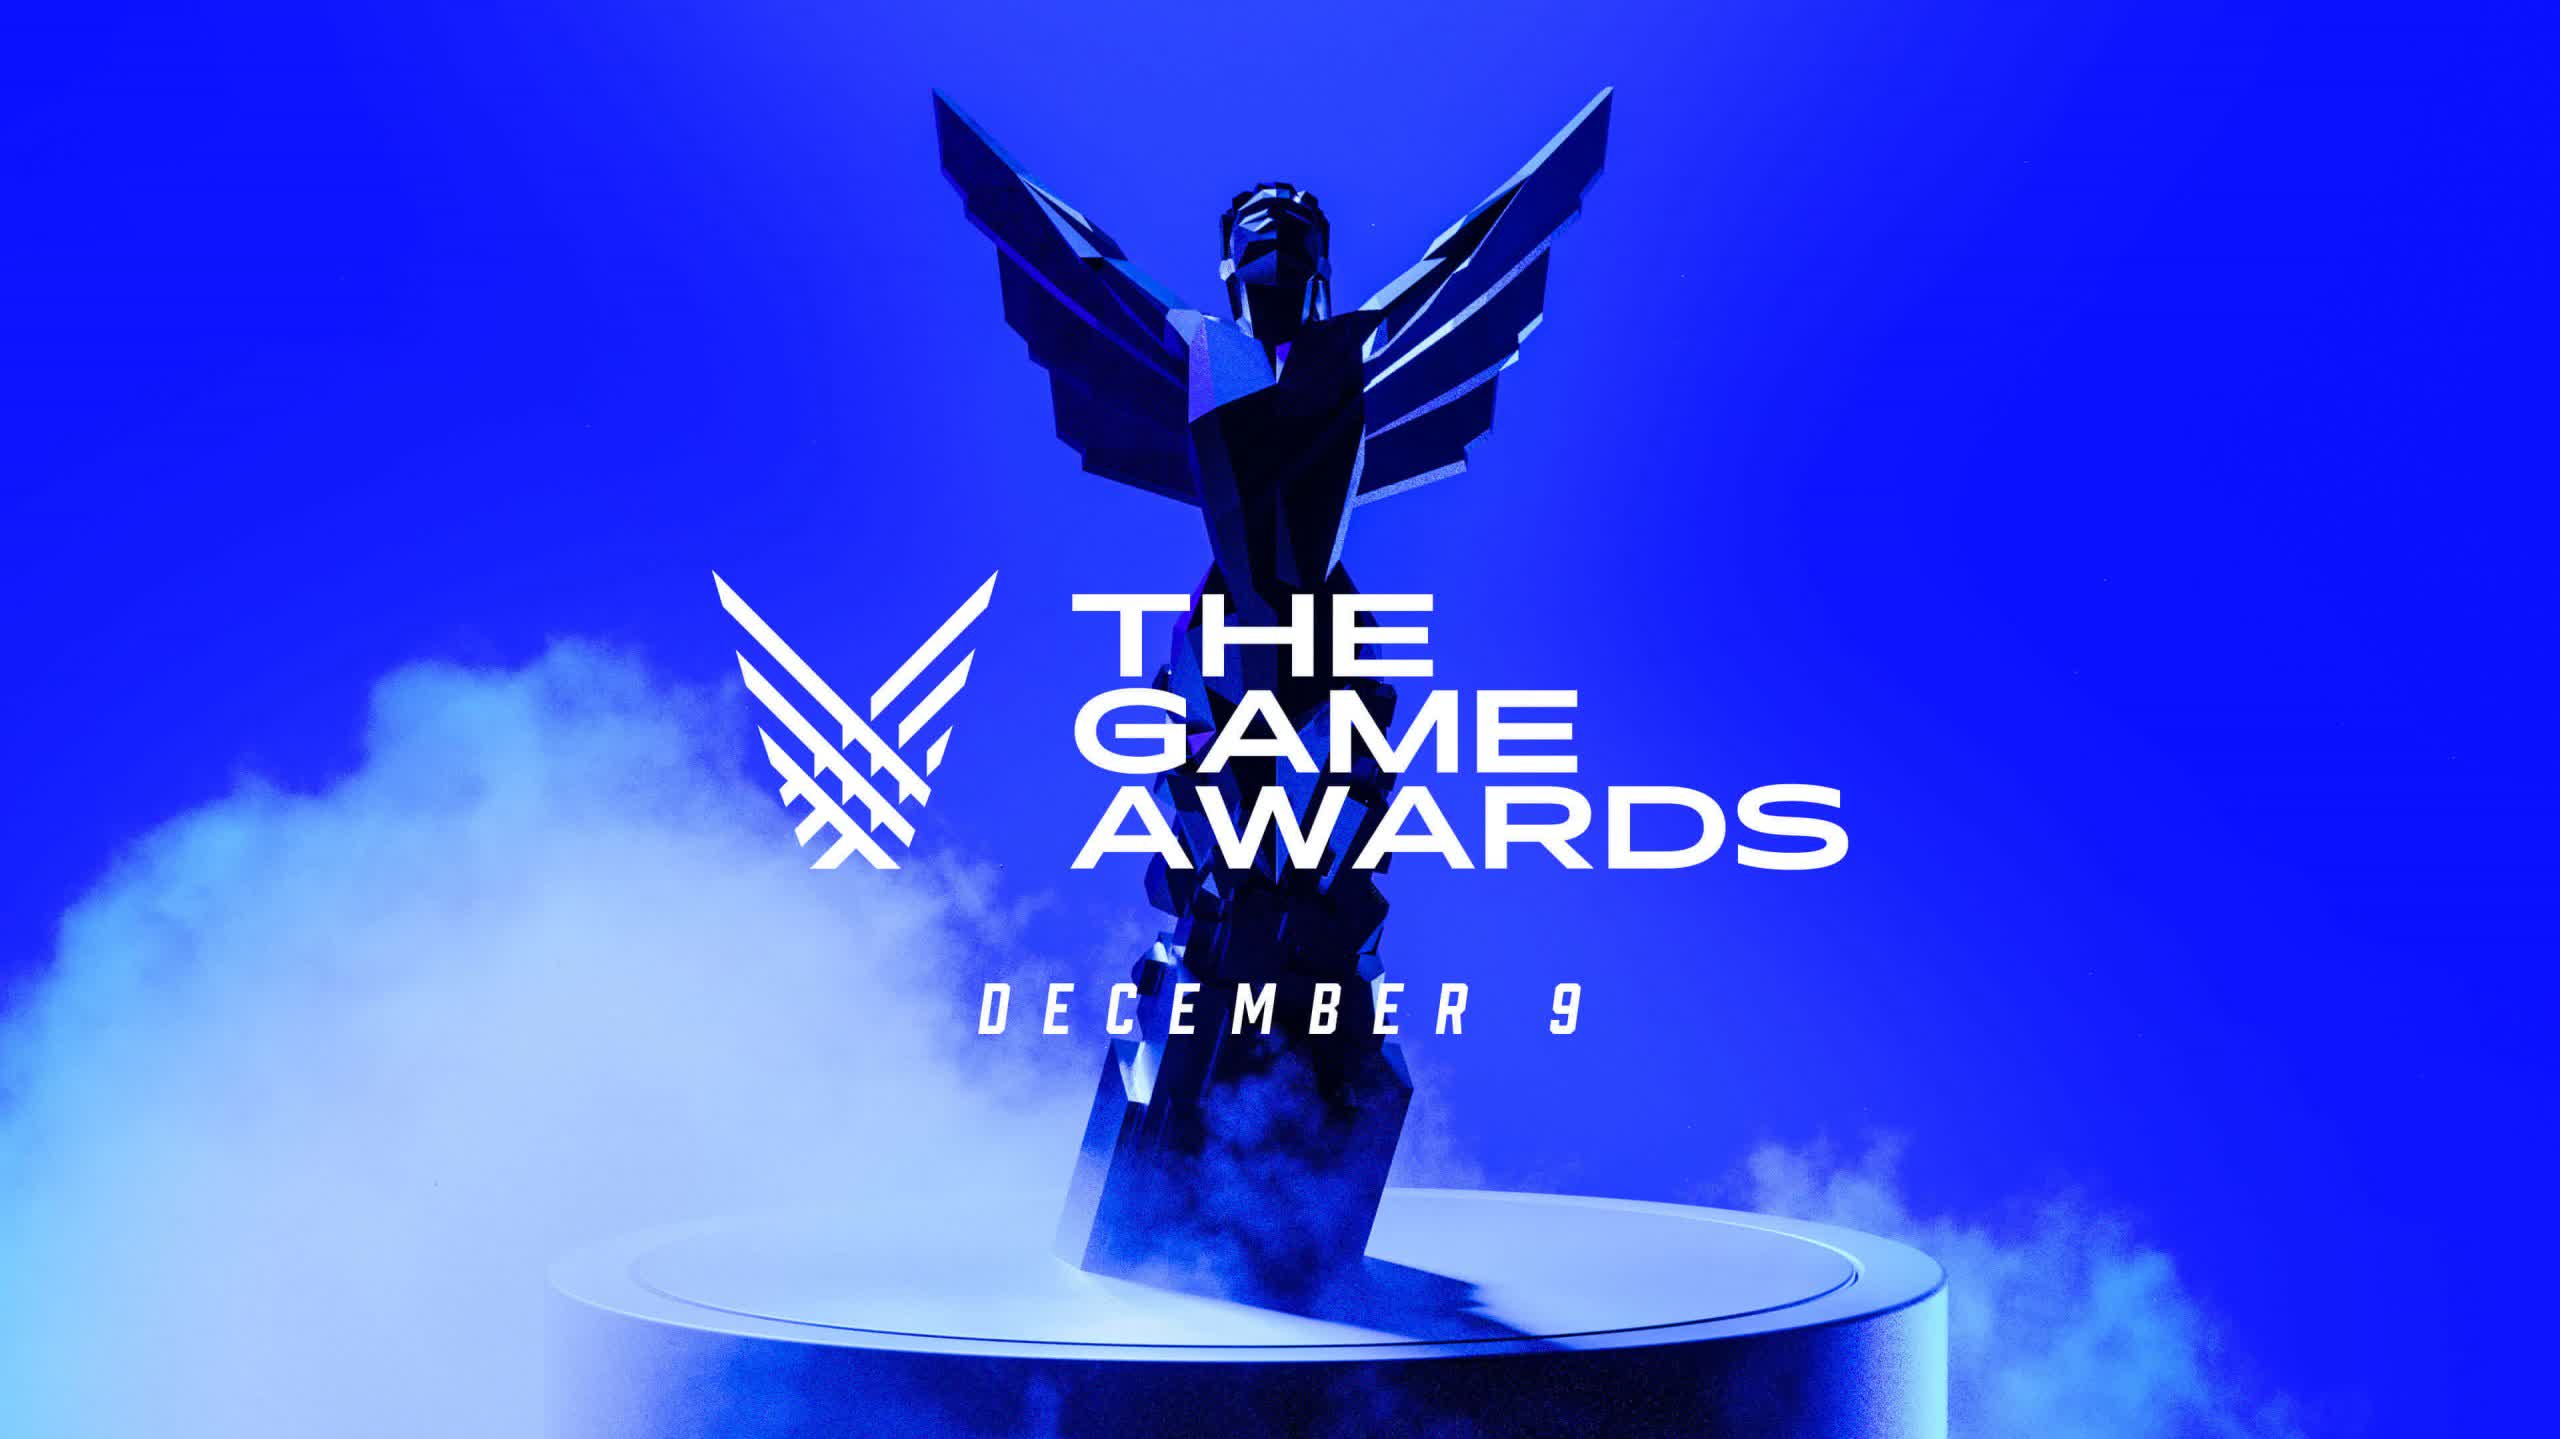 The Game Awards 2021 takes place tomorrow, check out the nominations, guests, and more